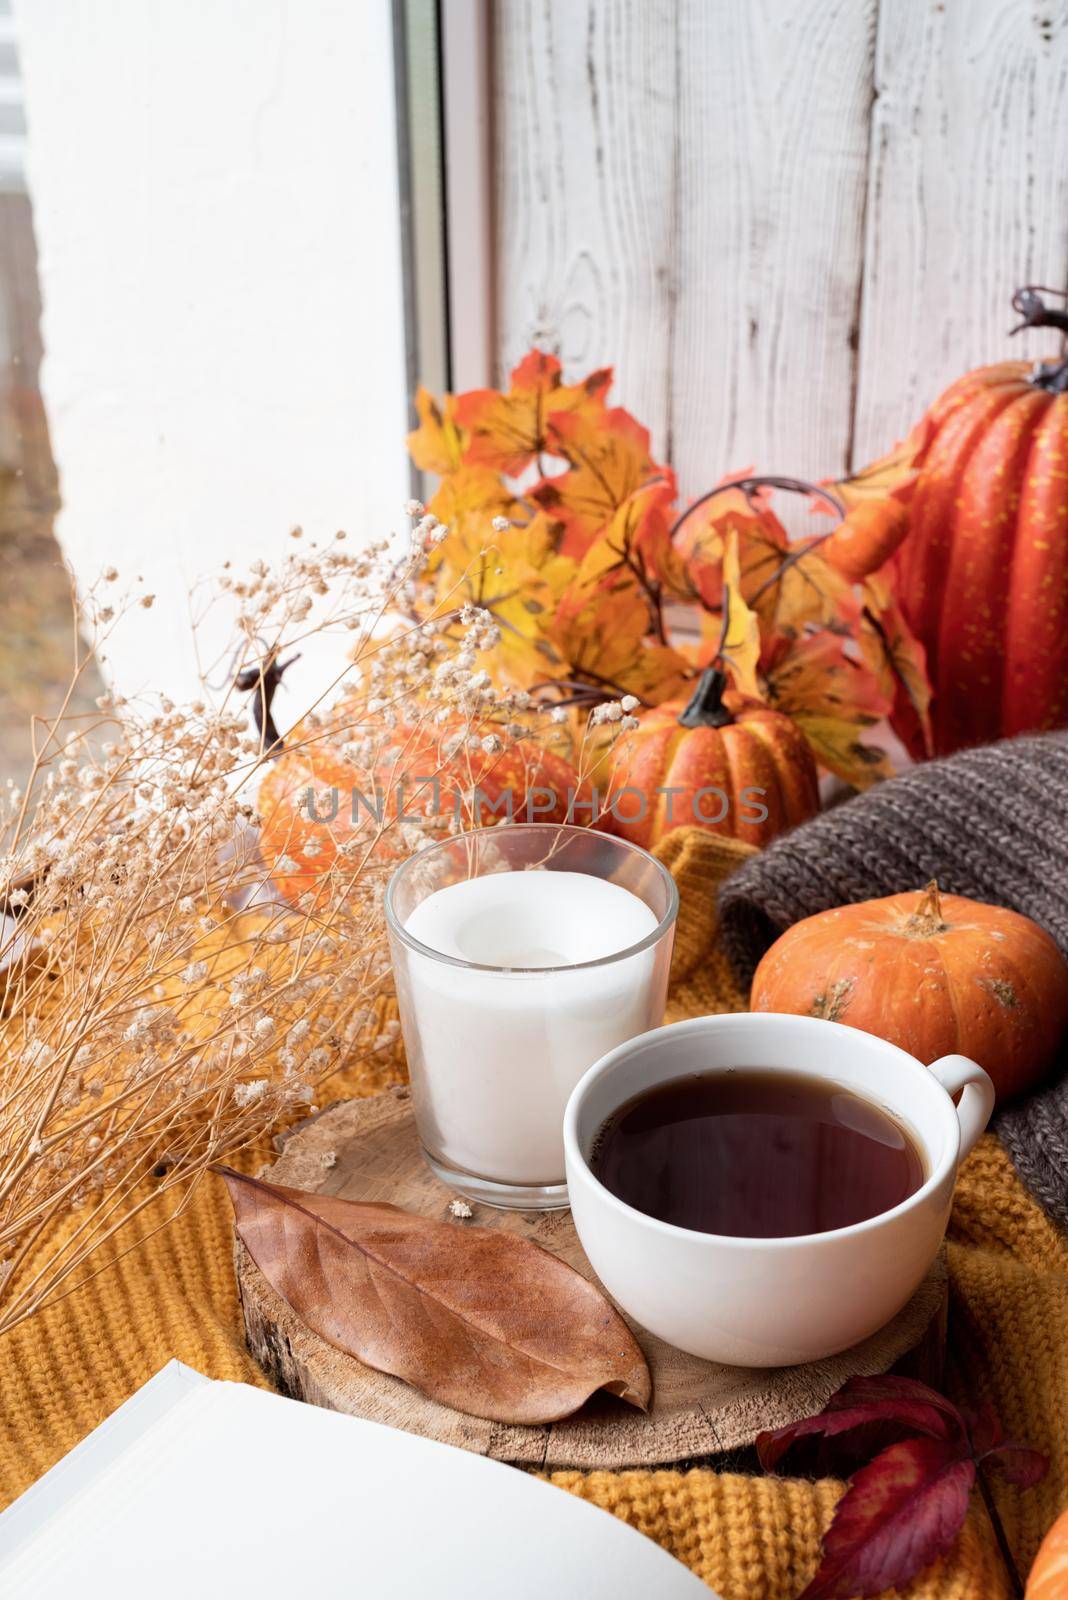 Hello fall. Cozy warm image. Cozy autumn composition, sweater weather. Pumpkins, hot black tea and sweaters on window